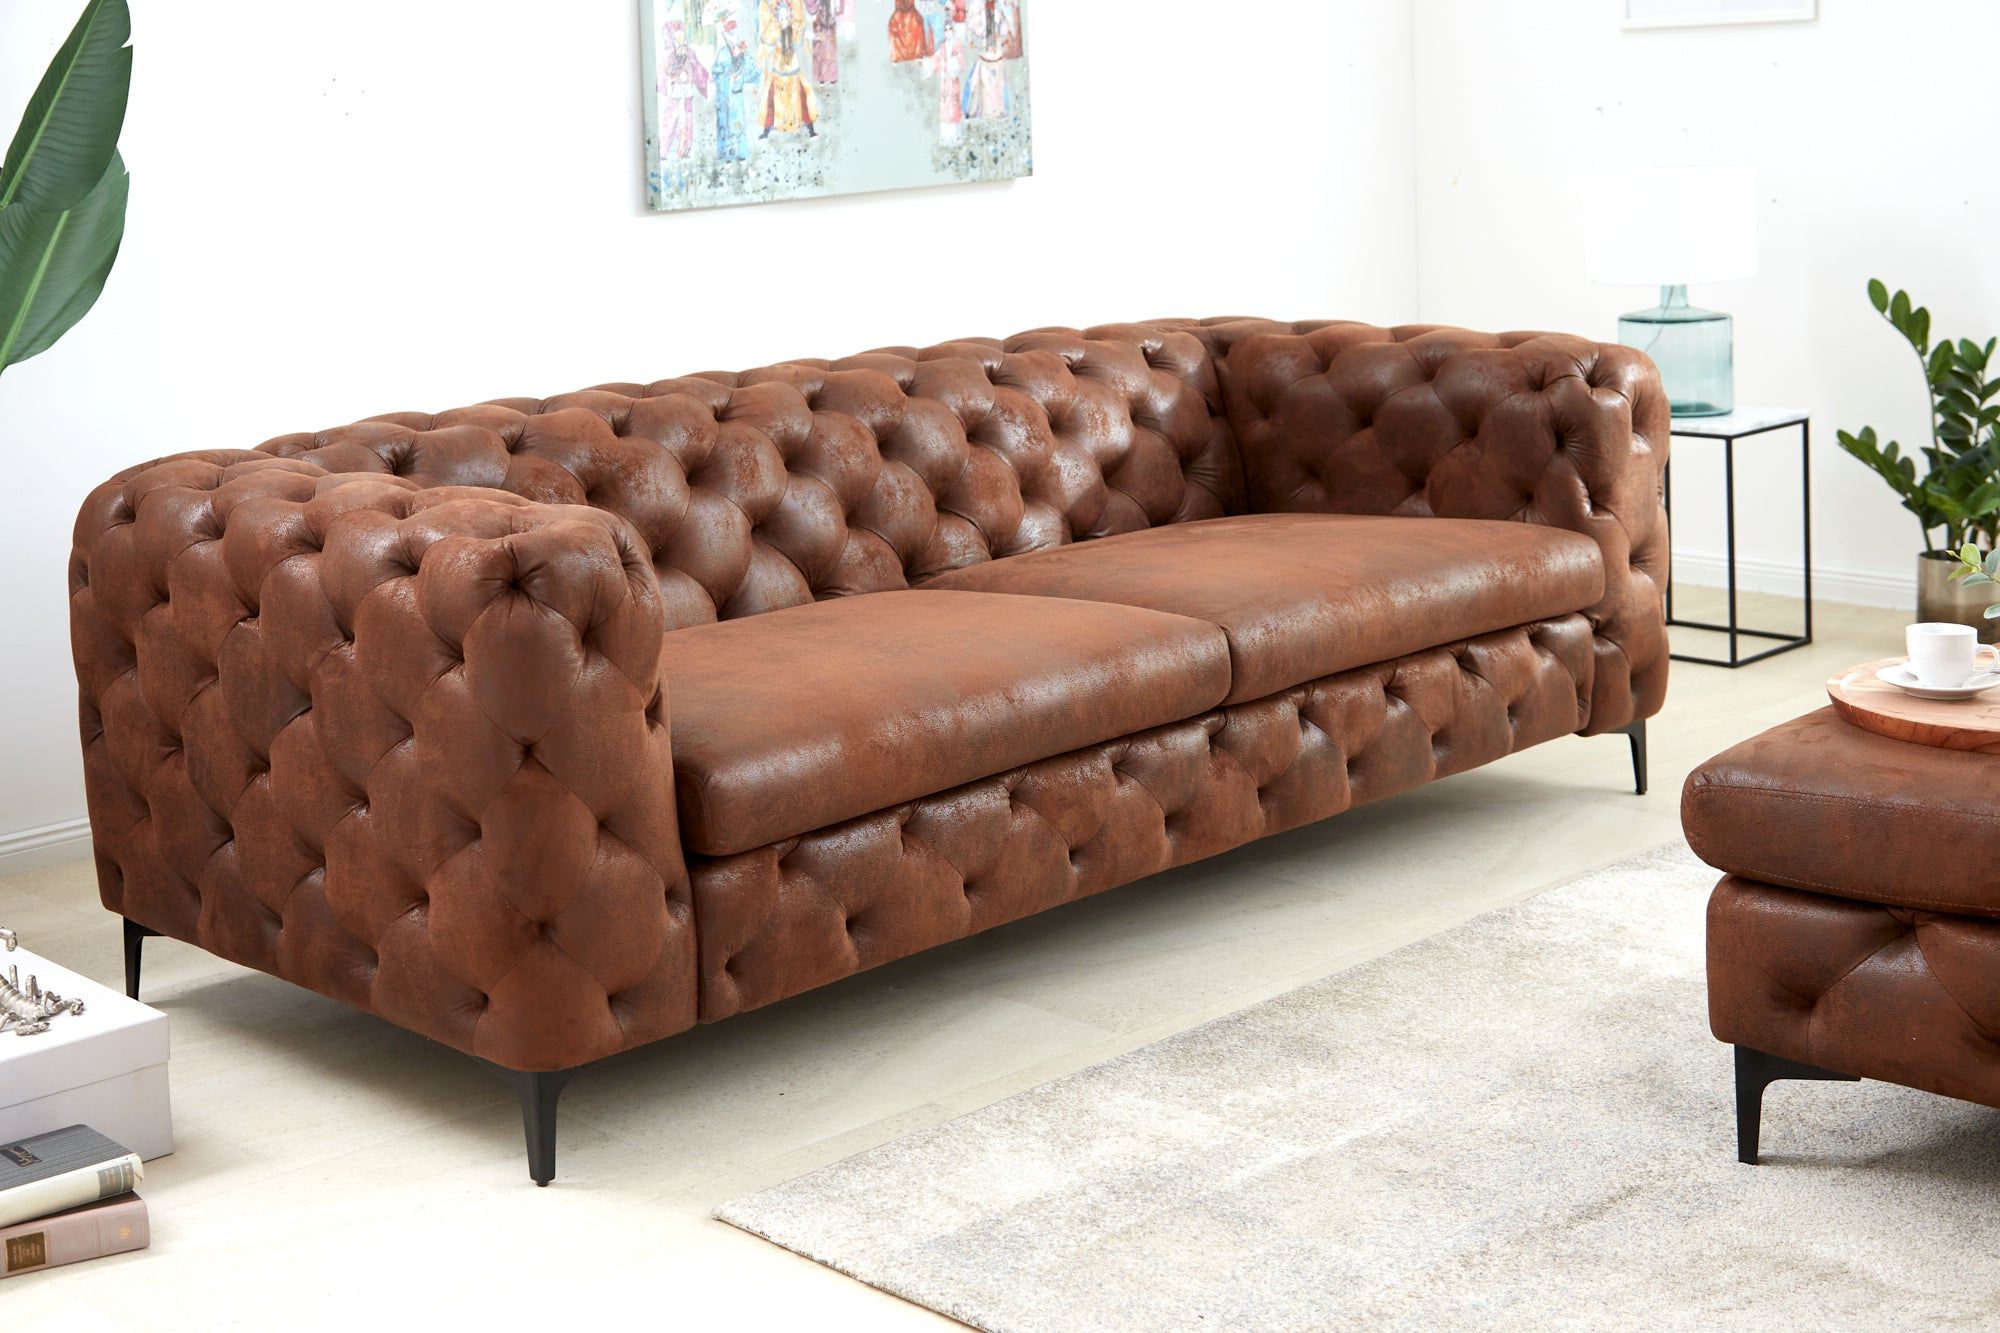 Chesterfield Sofa Modern Baroque Antique Brown 240 Cm – Artico Interiors With Chesterfield Sofas (View 12 of 20)